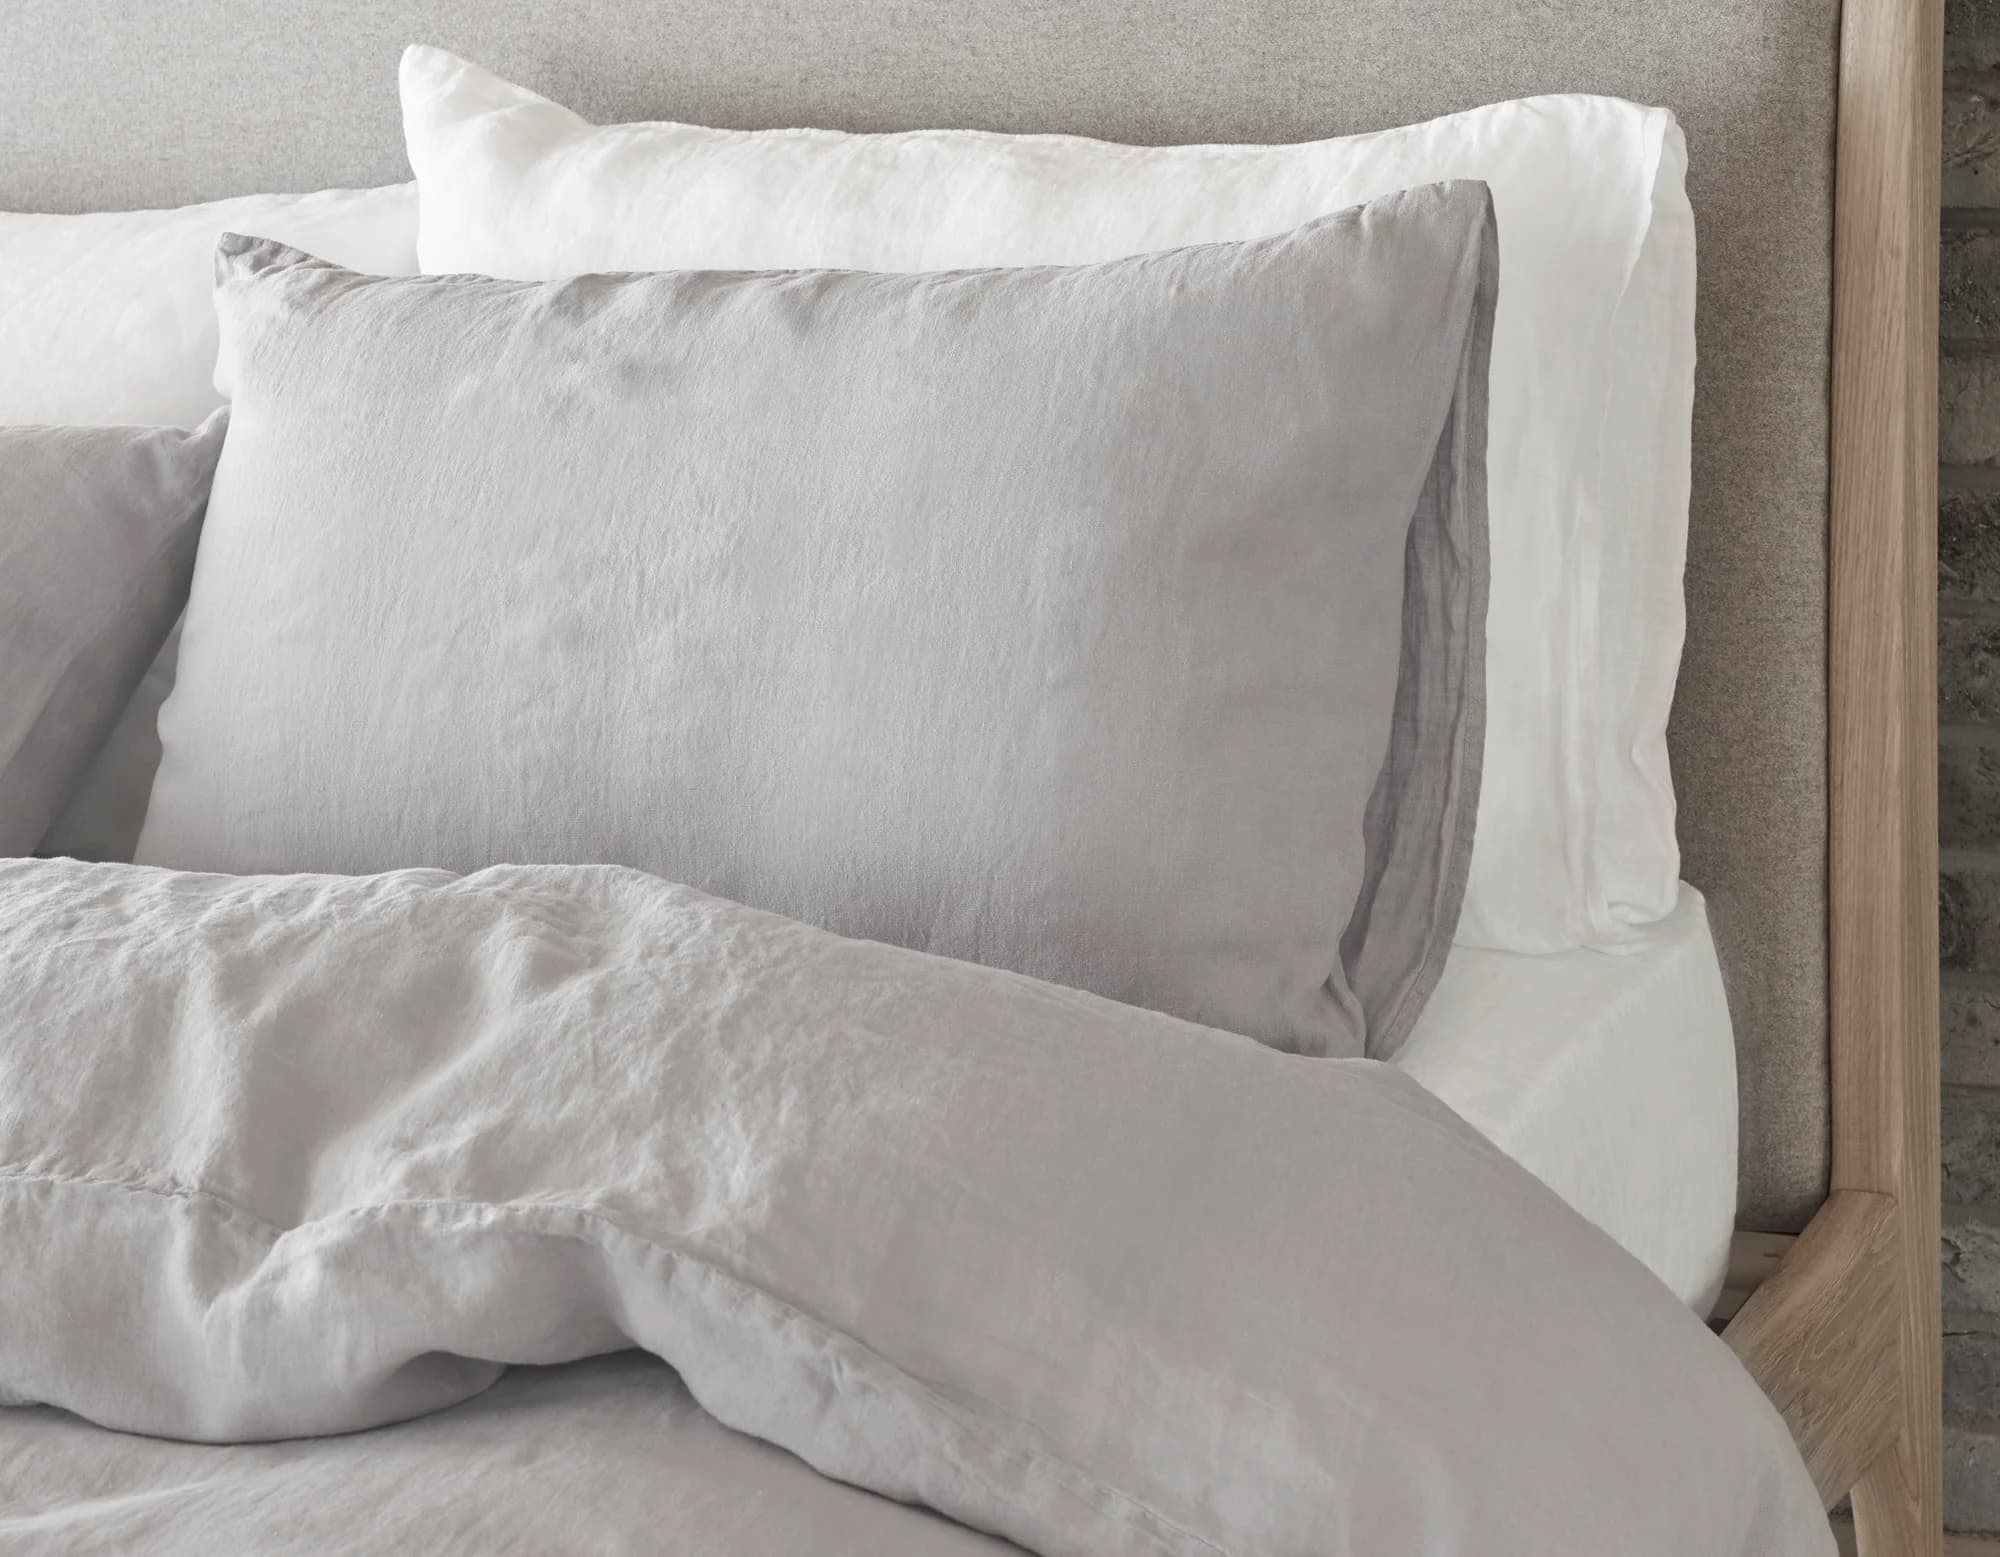 Grey double linen duvet cover and linen pillowcases on bed